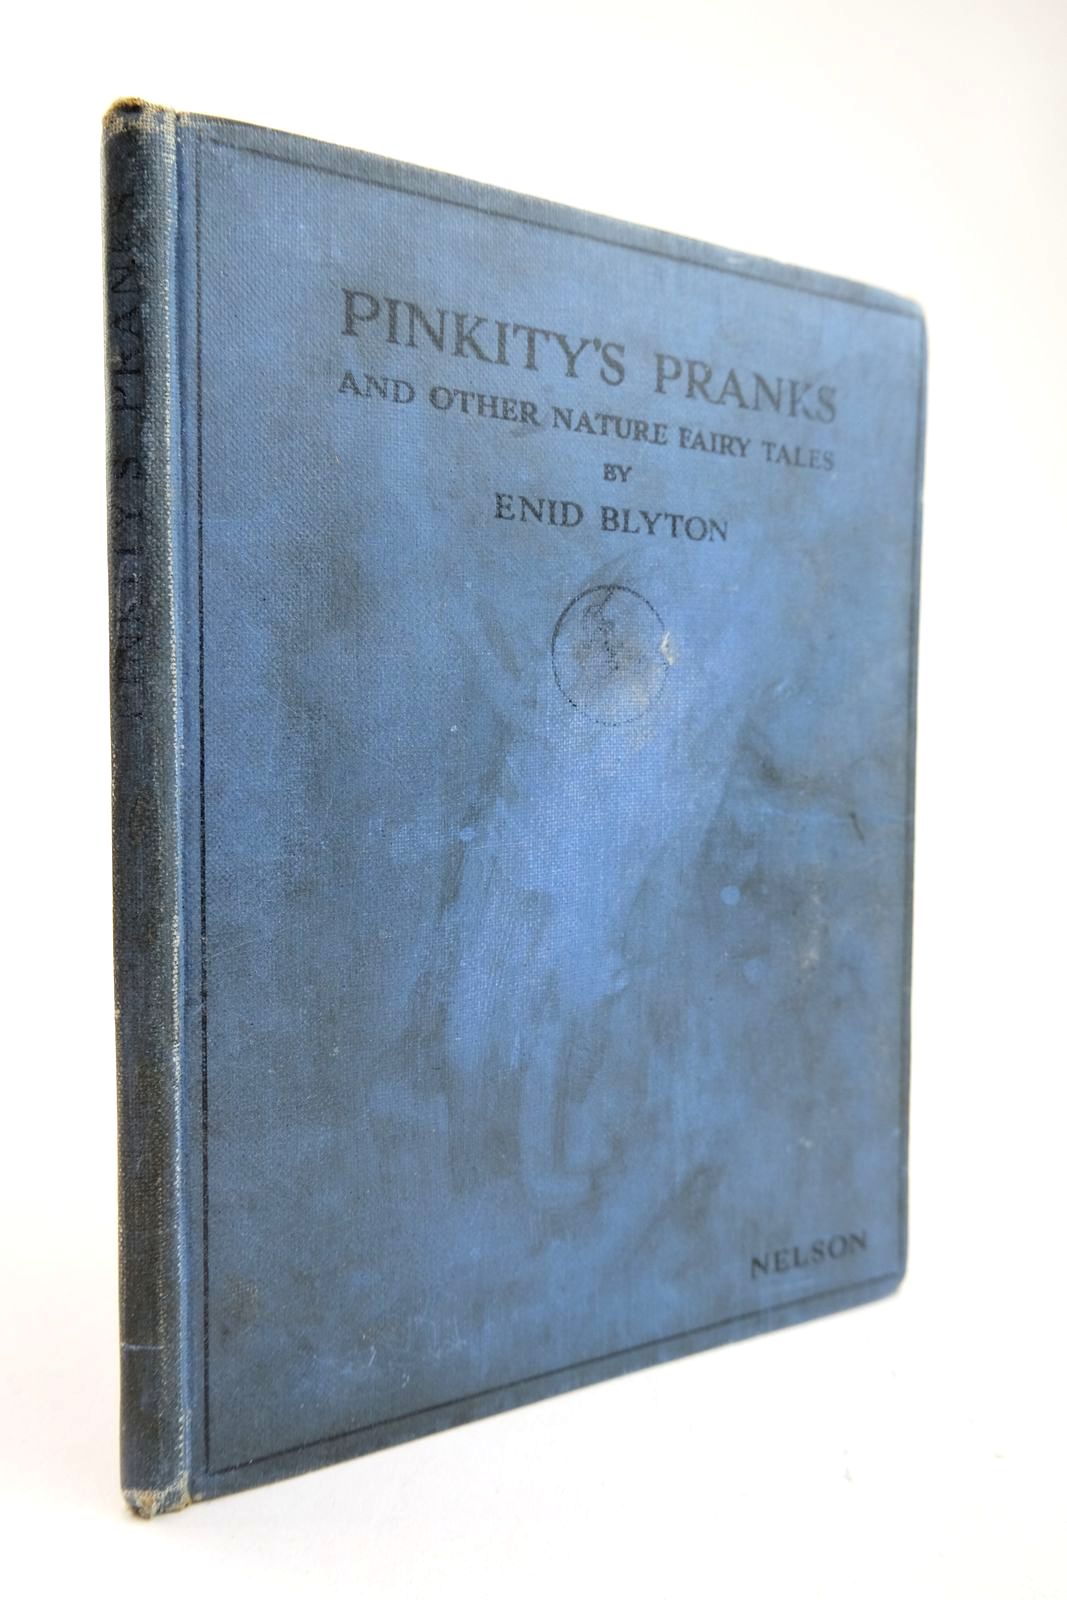 Photo of PINKITY'S PRANKS AND OTHER NATURE FAIRY TALES- Stock Number: 2133405